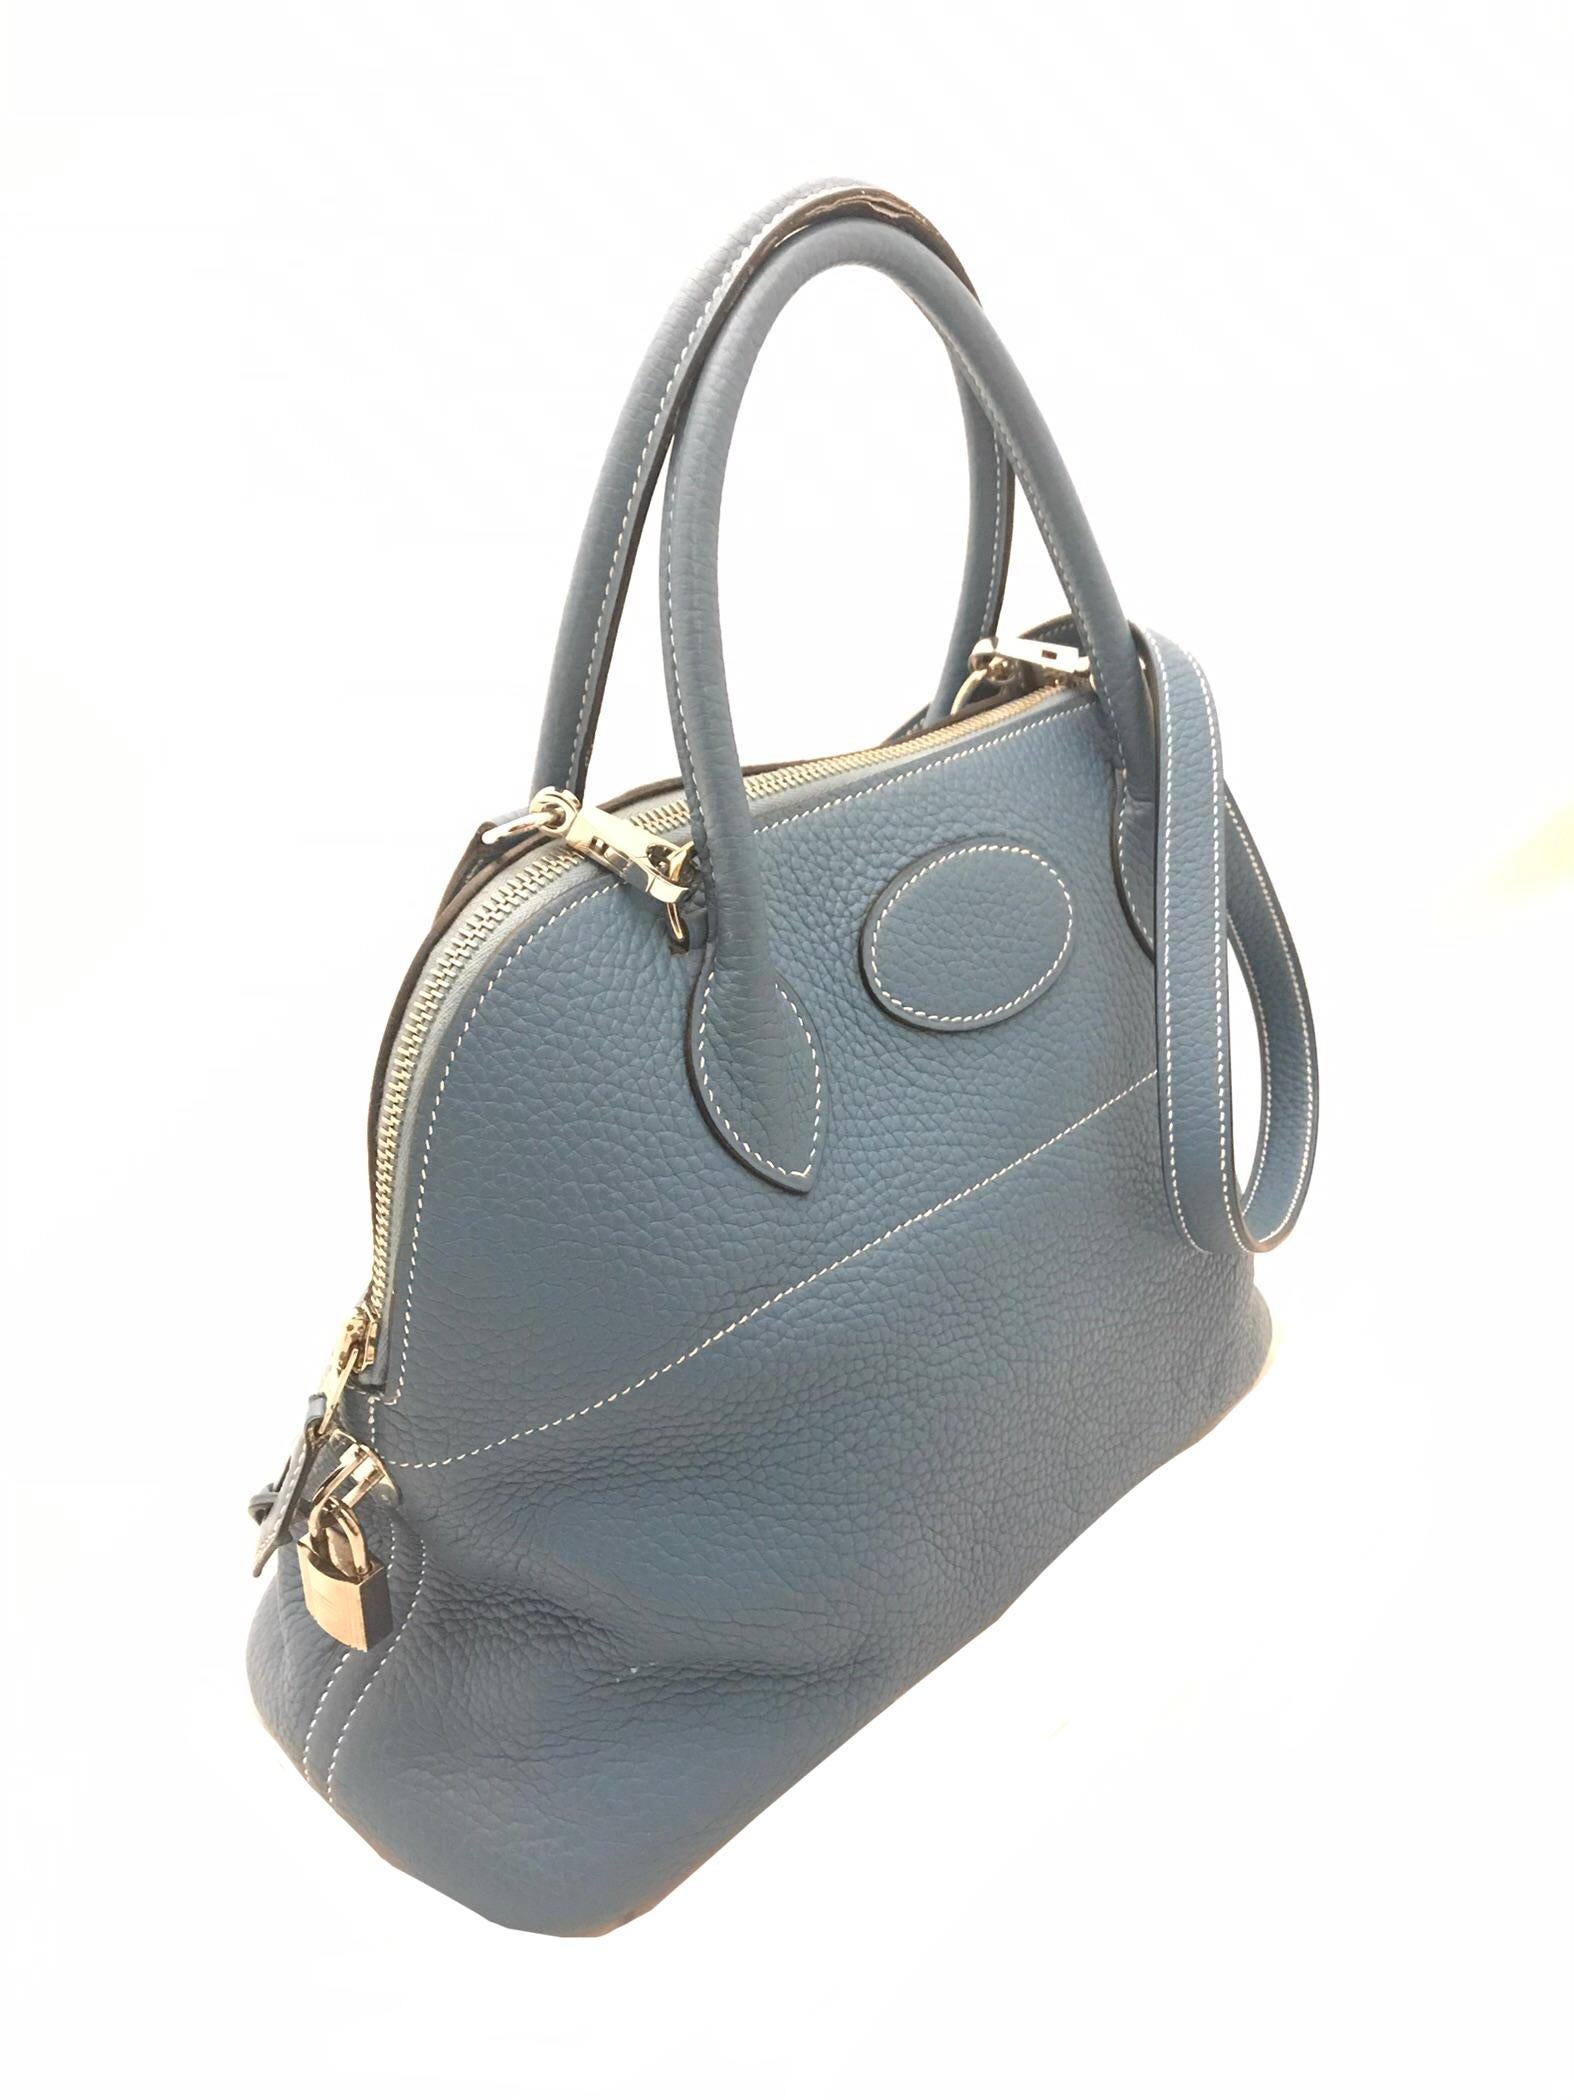 Hermes Bleu Jean Bolide Bag In Good Condition For Sale In Glasgow, GB